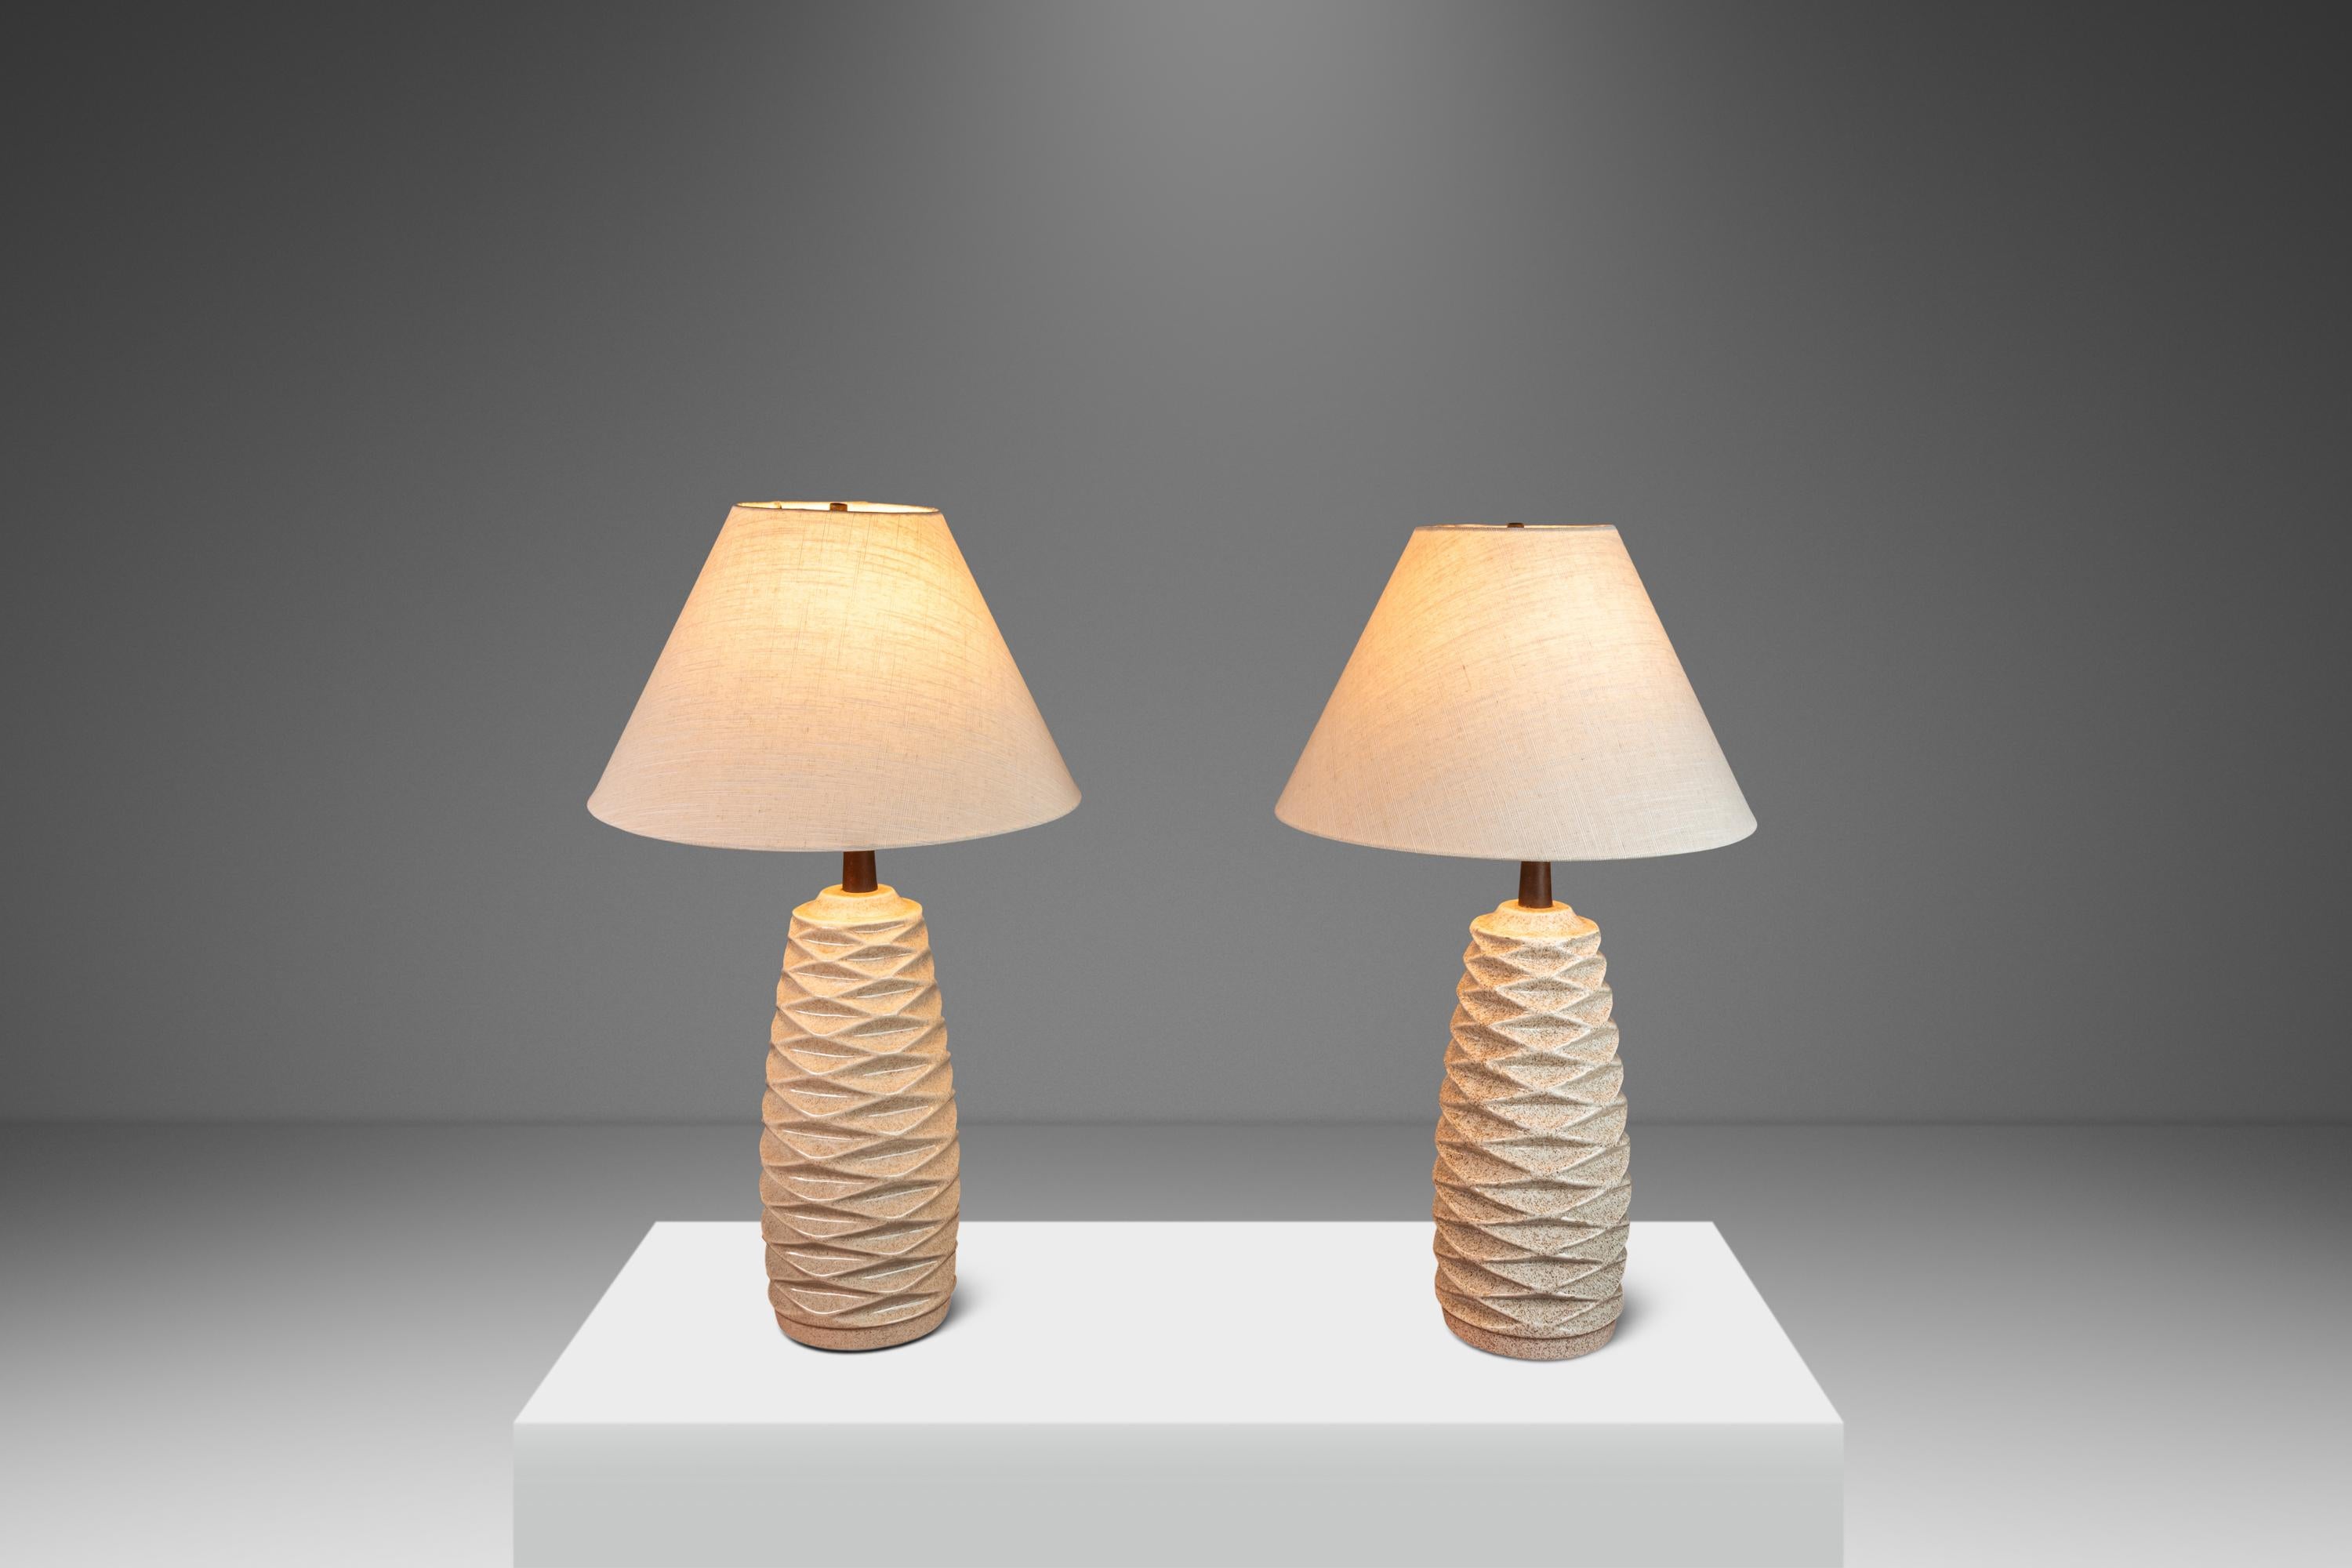 American Set of Two ( 2 ) Mid-Century Modern Ceramic Table Lamps w/ Walnut Necks, 1960's For Sale